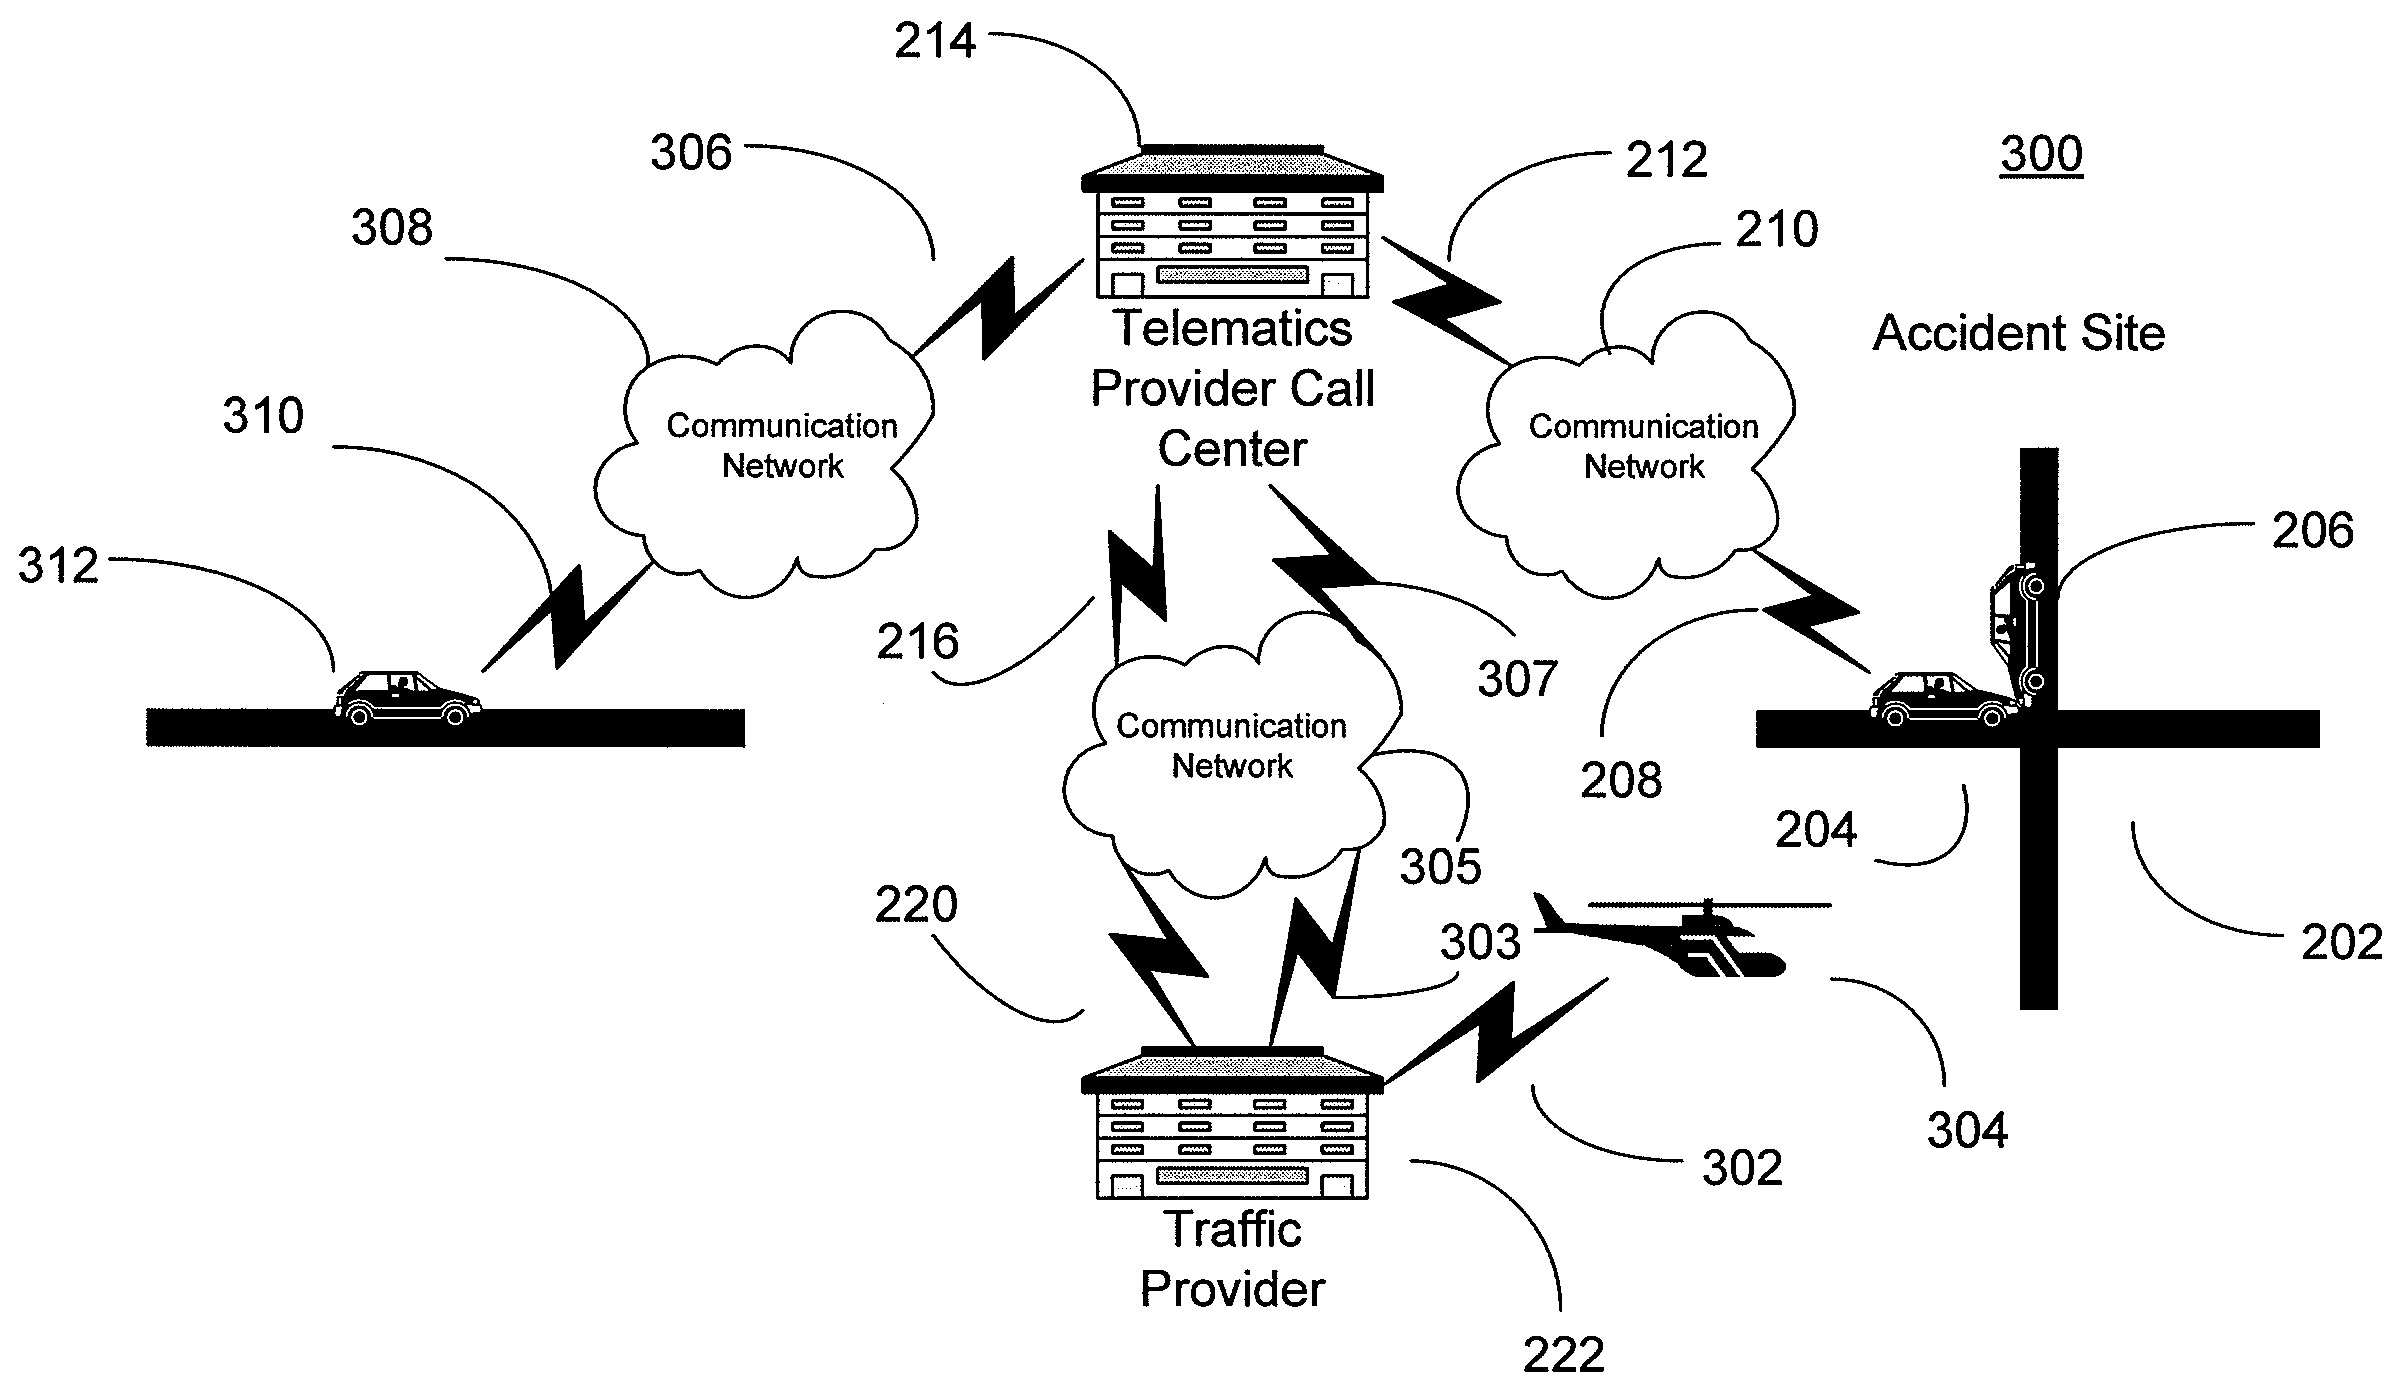 Method and System for Automatically Updating Traffic Incident Data for In-Vehicle Navigation